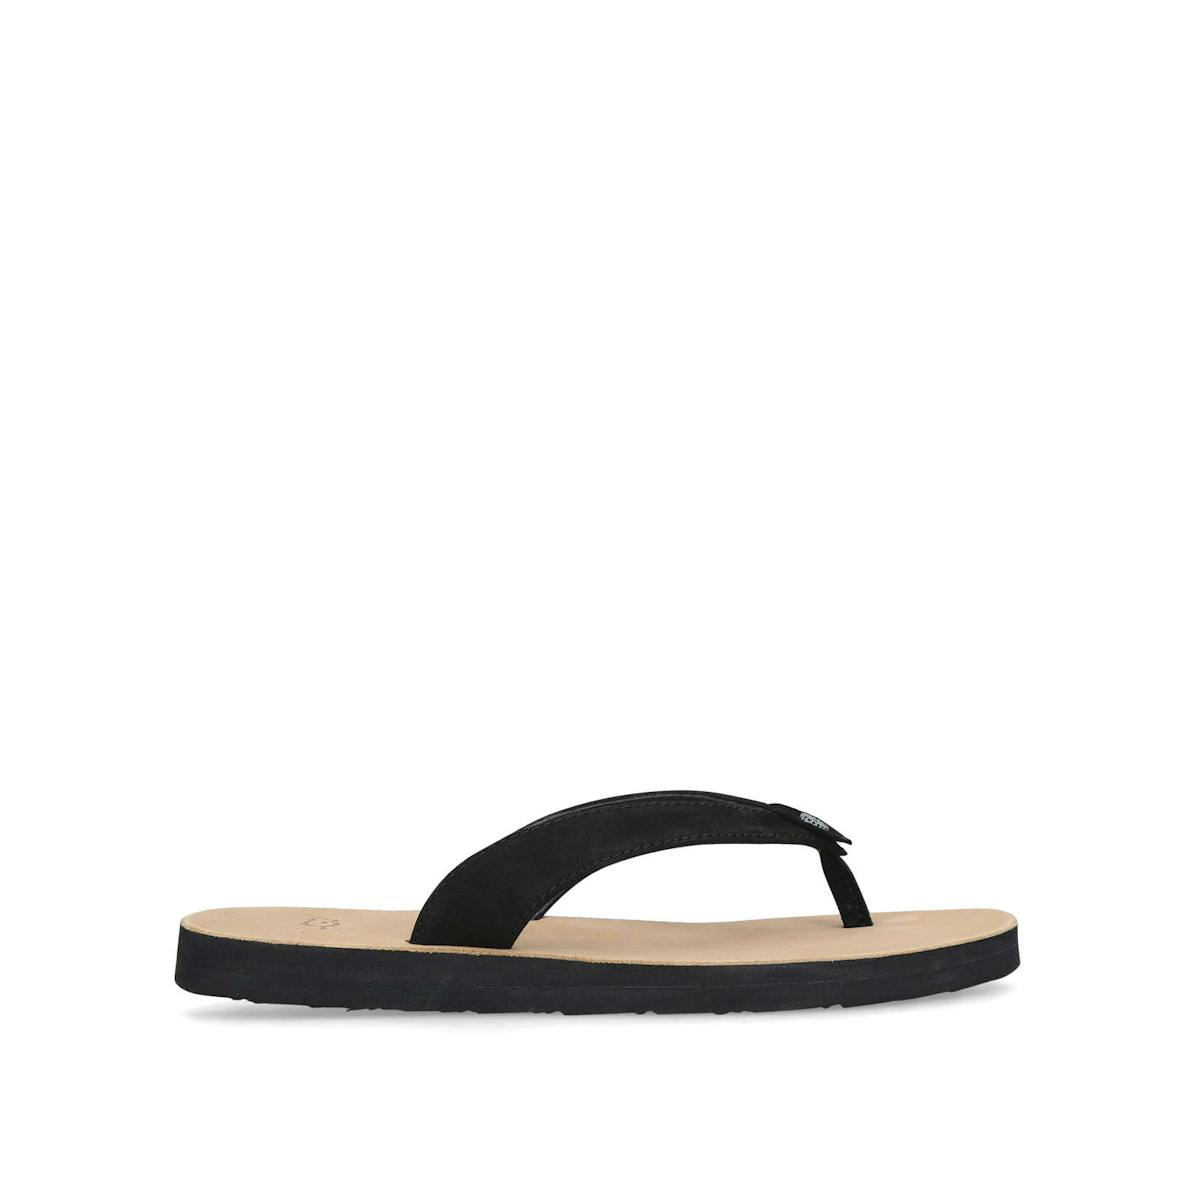 Where to buy: elevated flip flops and low-heeled sandals